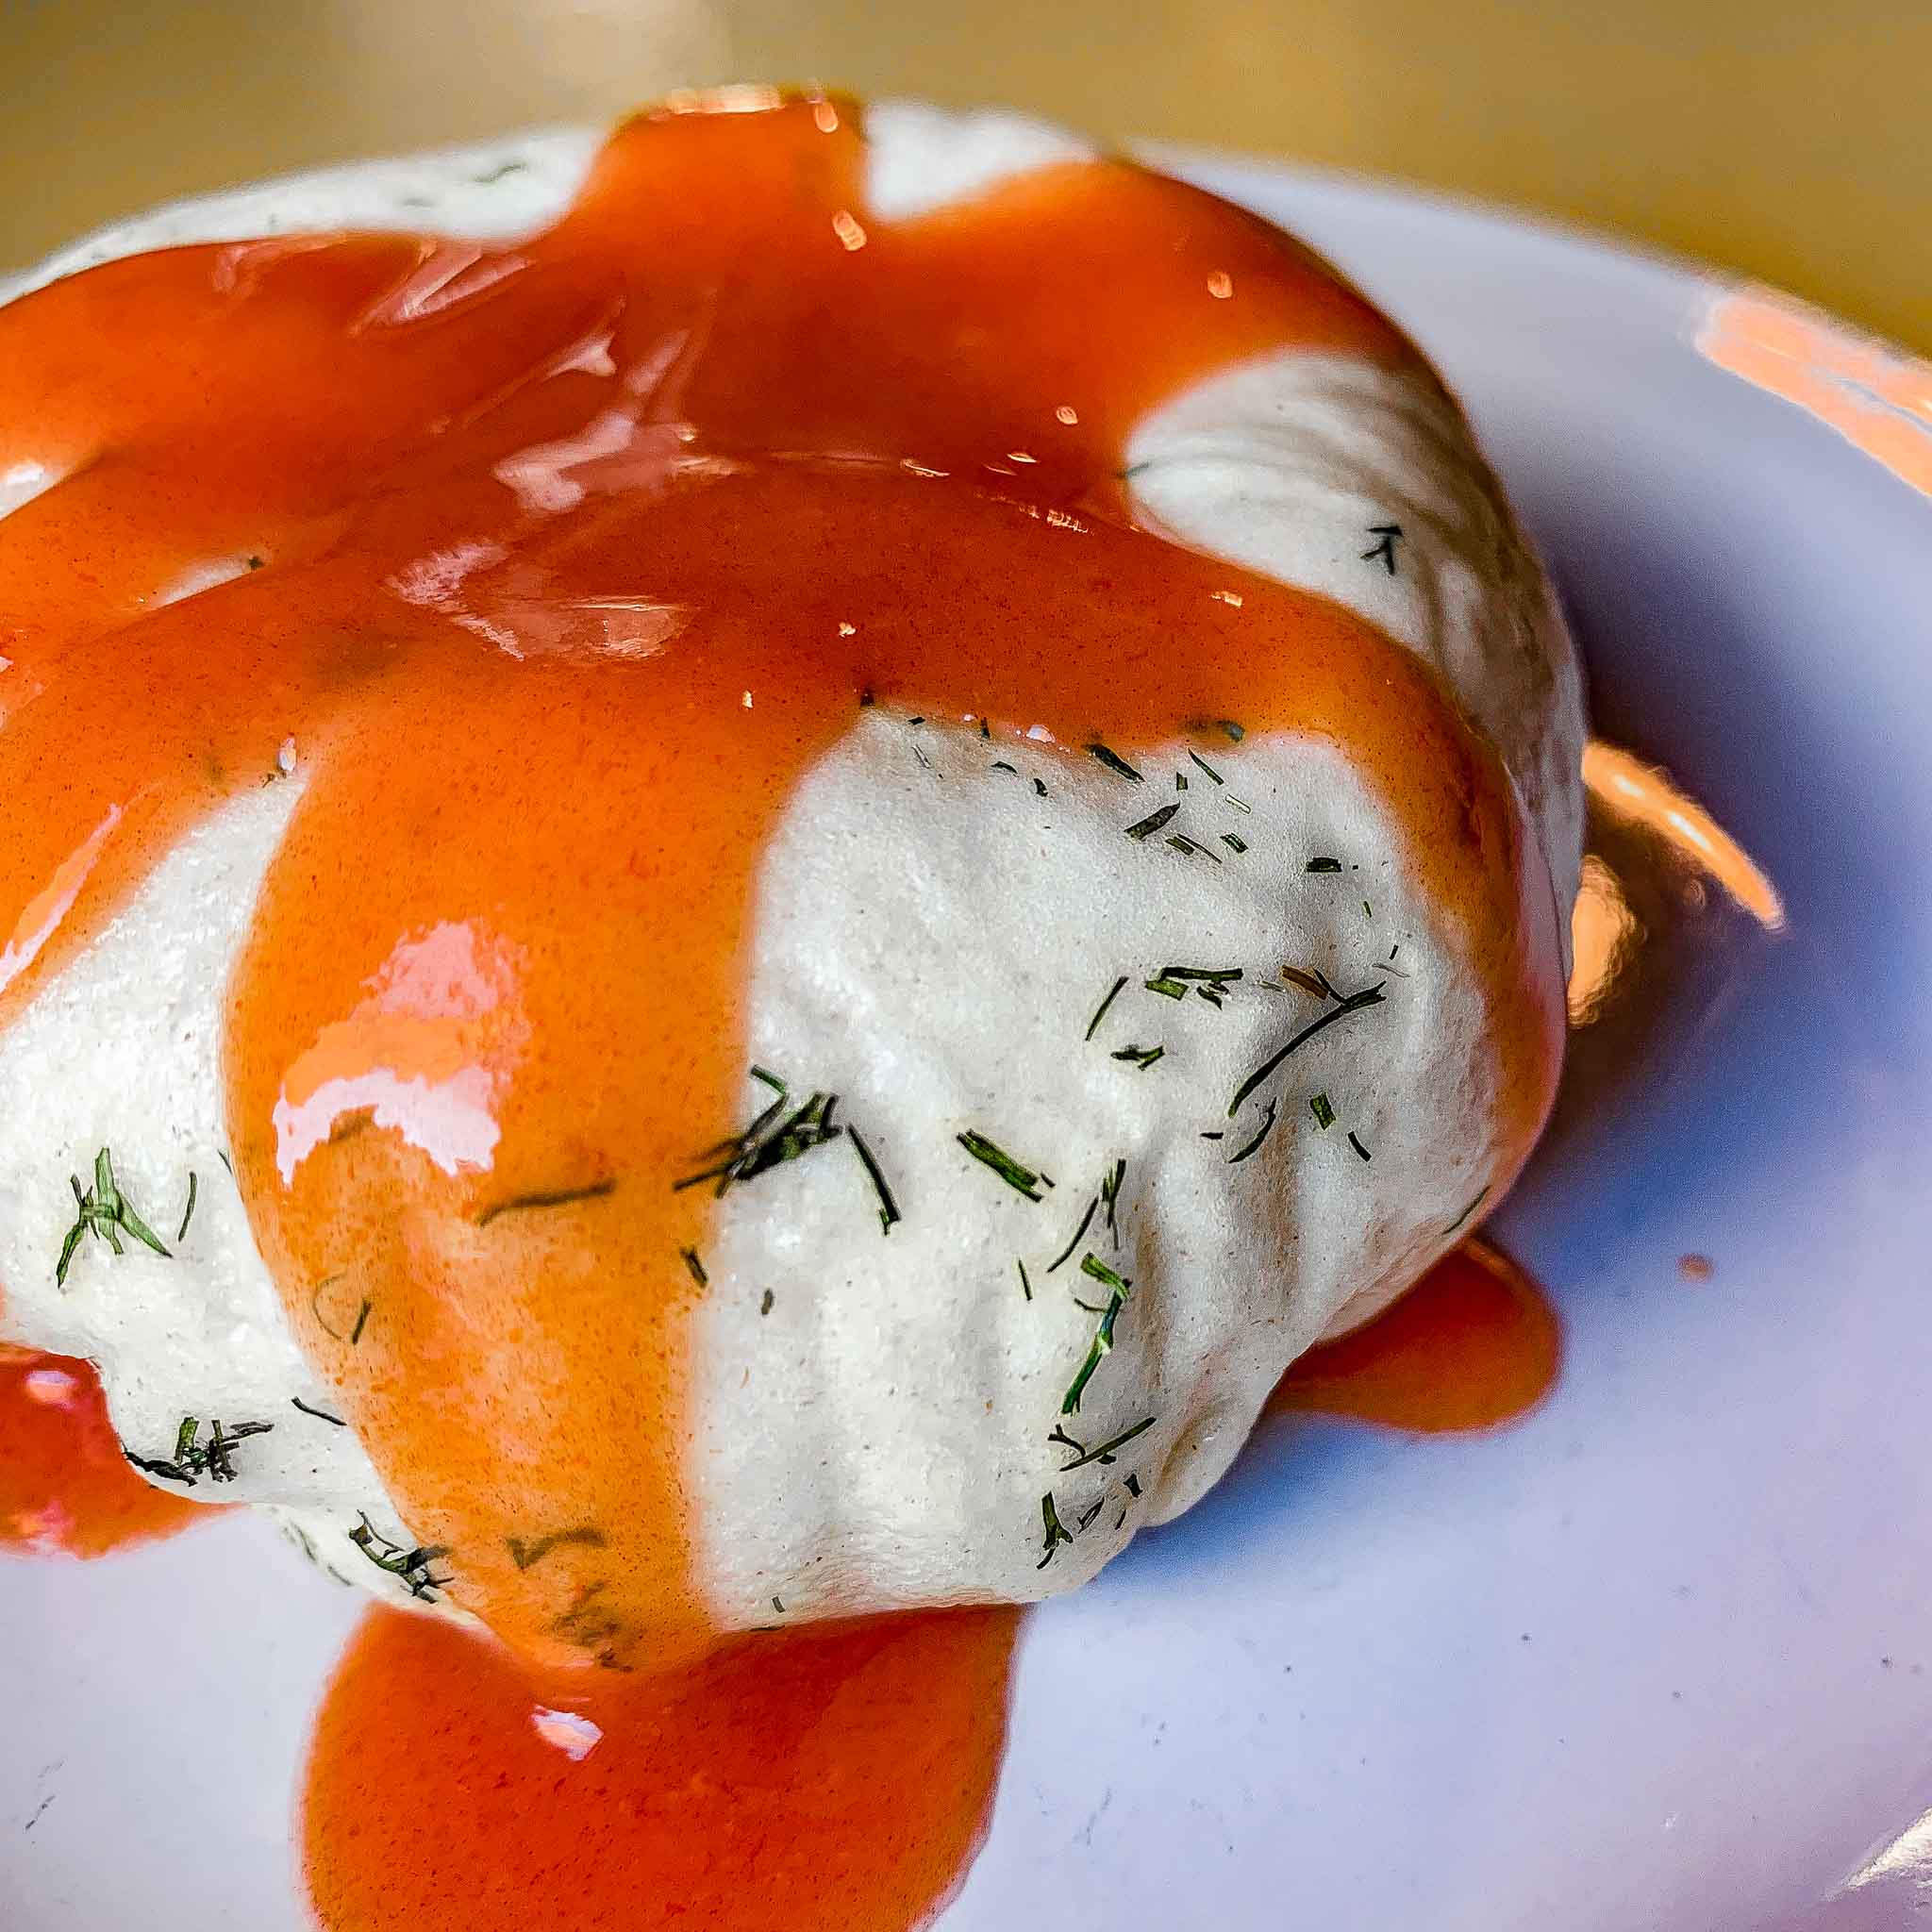 Red hot sauce covers a dumpling rolled in fresh green herbs